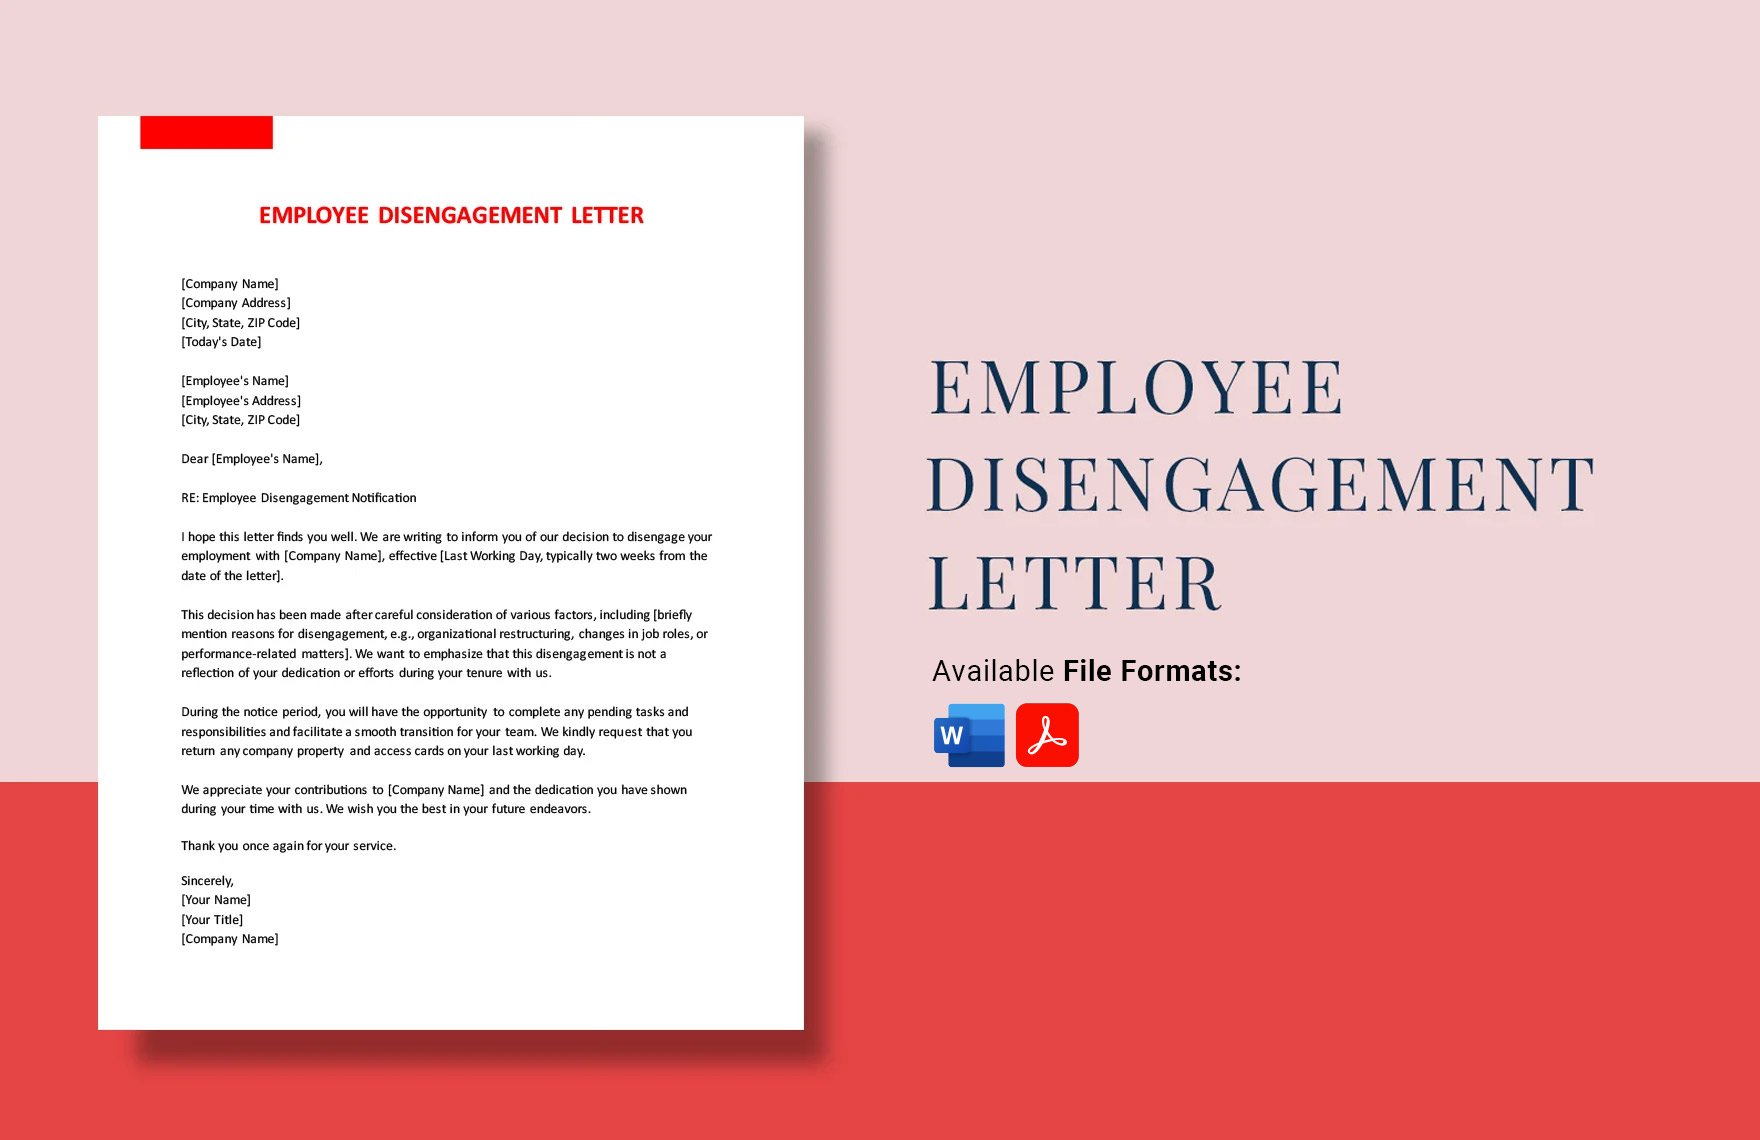 Employee Disengagement Letter in Word, PDF